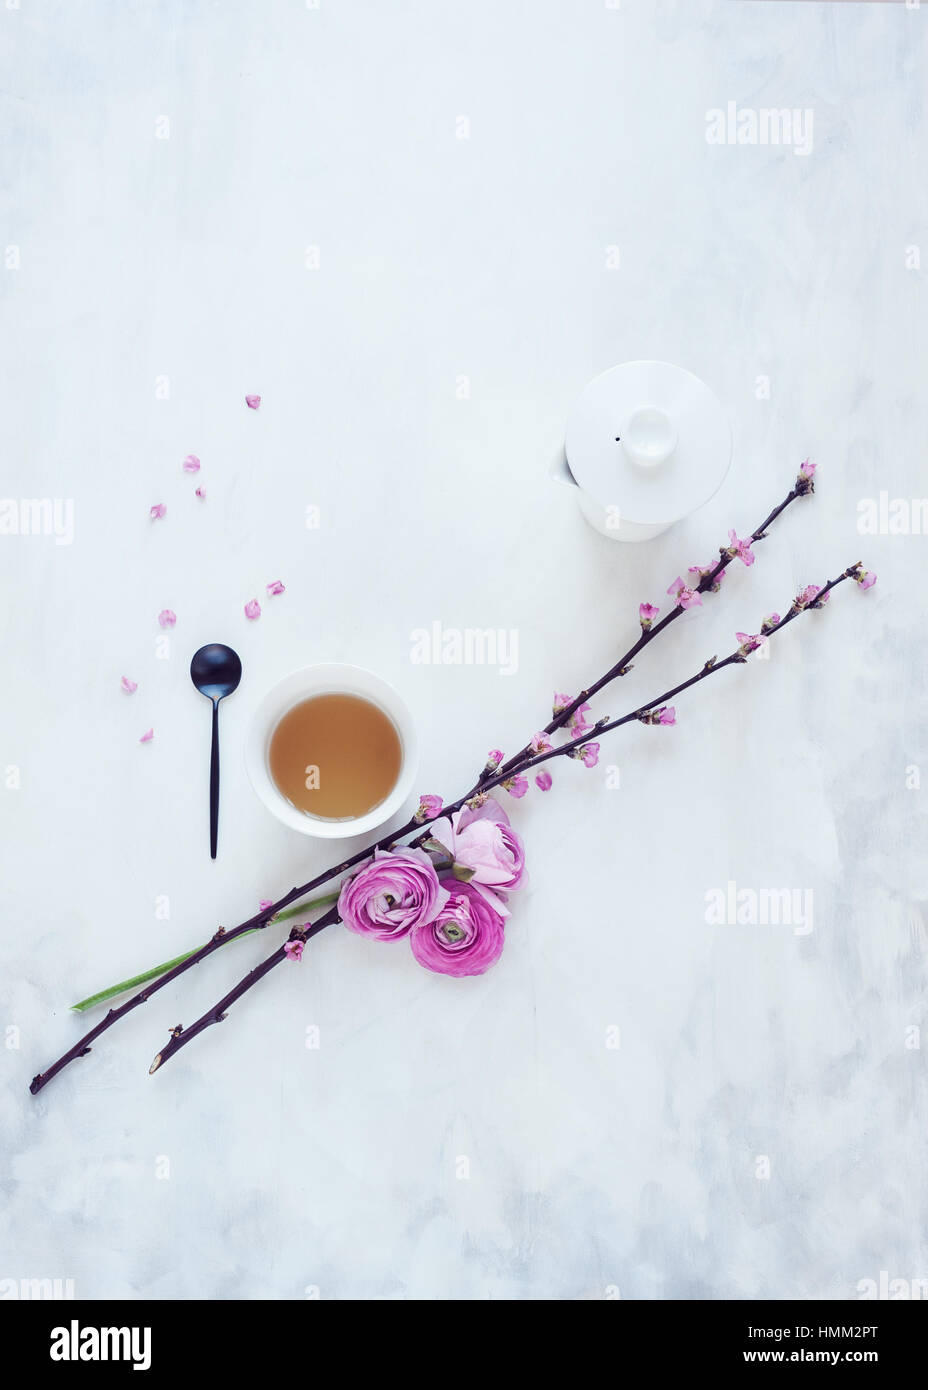 Flat lay of spring flowers cherry blossom and ranunculus arranged on a painted white and grey backdrop with a teacup teapot Stock Photo